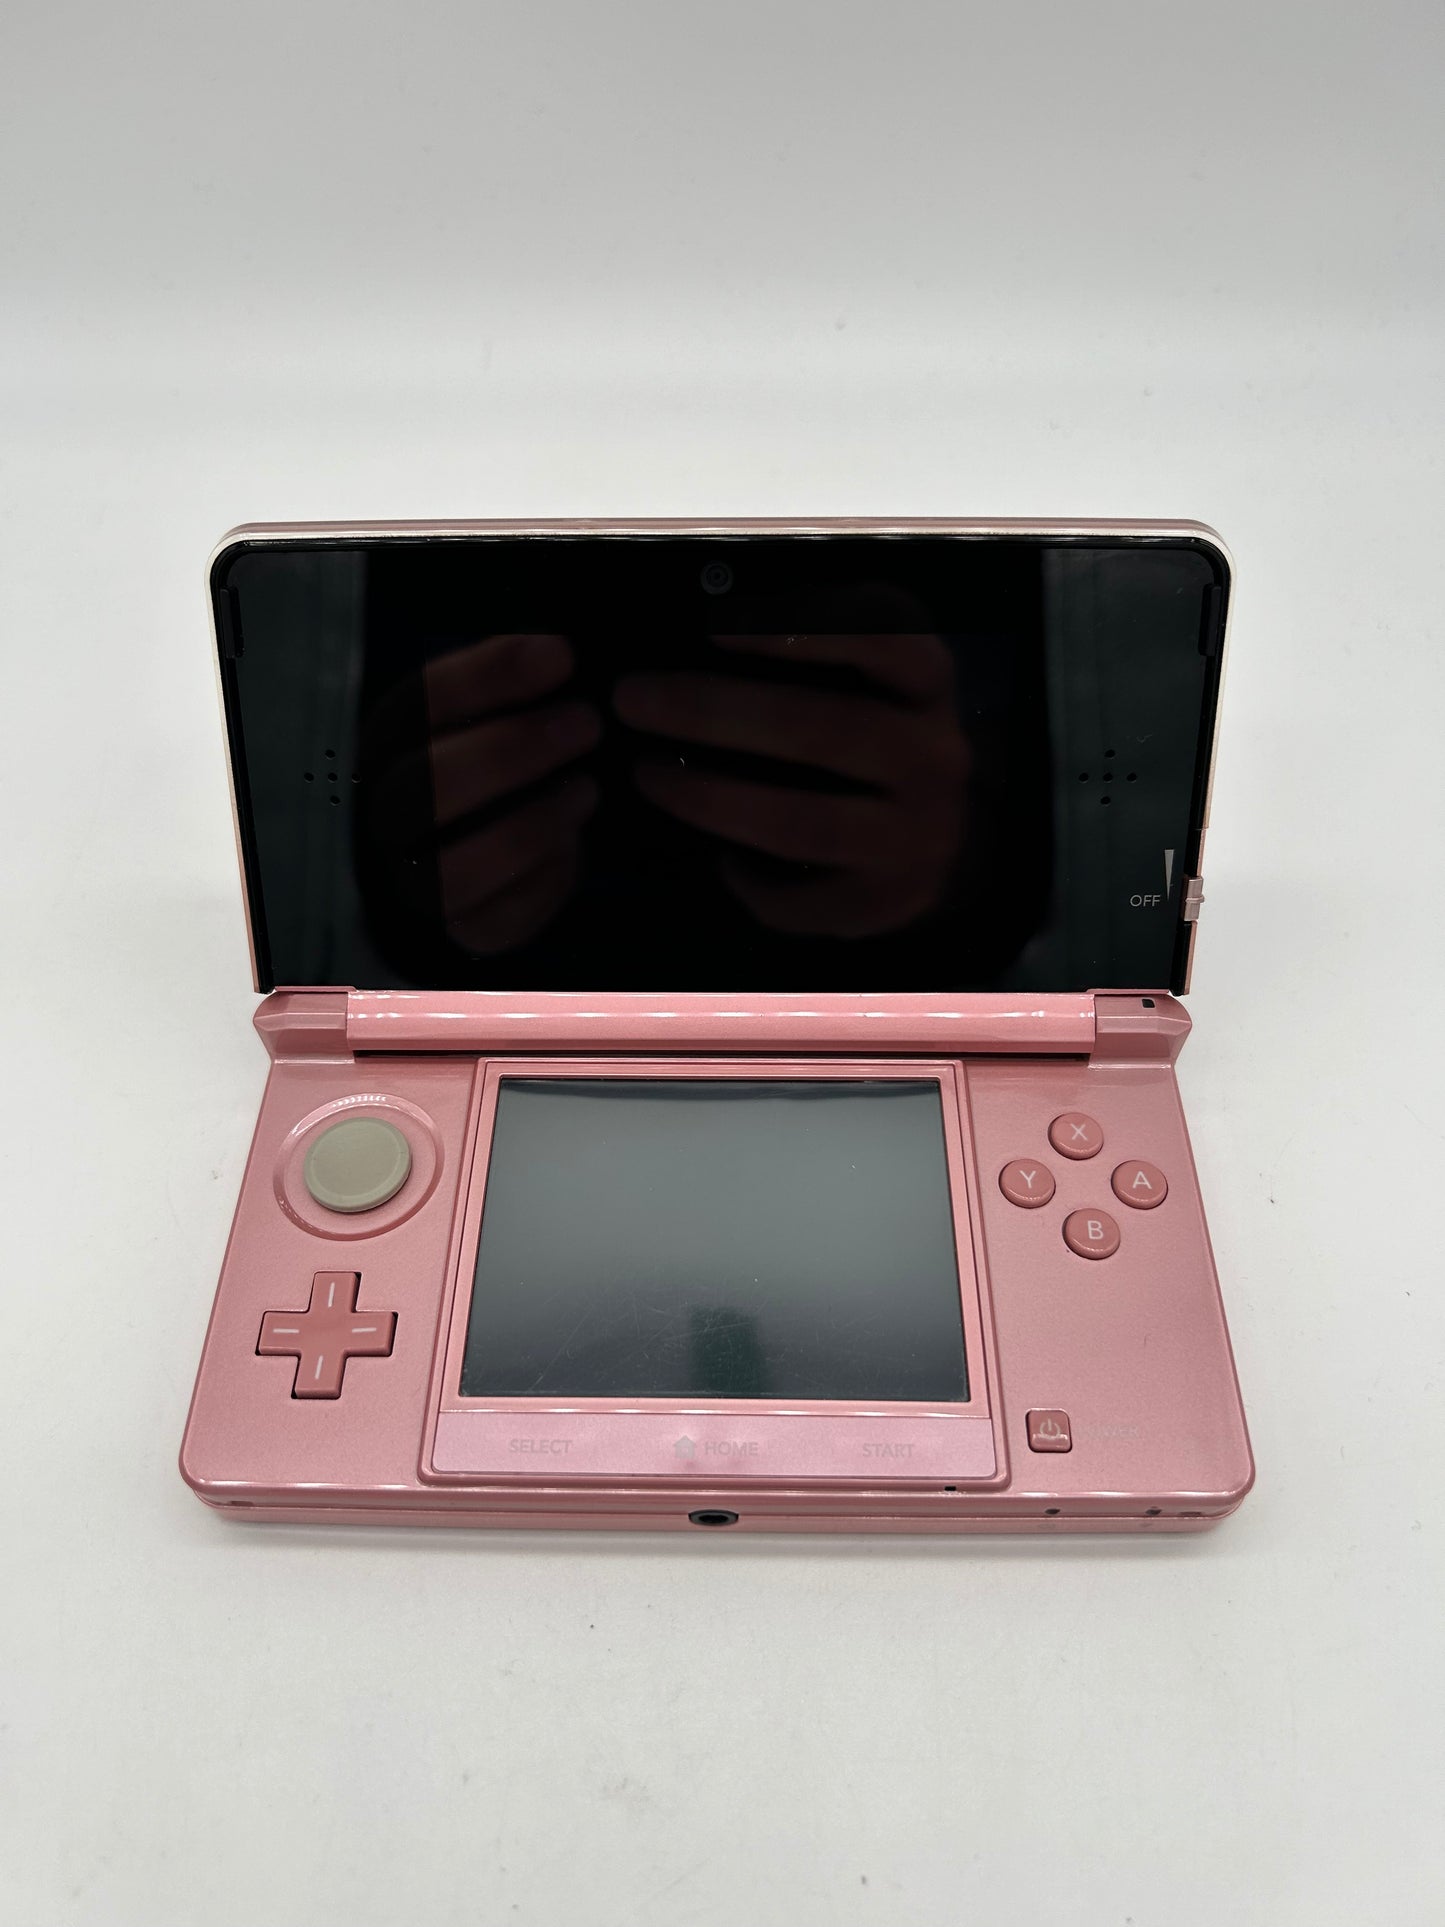 NiNTENDO 3DS CONSOLE | MODEL ROSE PERLE PEARL PiNK CTR-001(USA